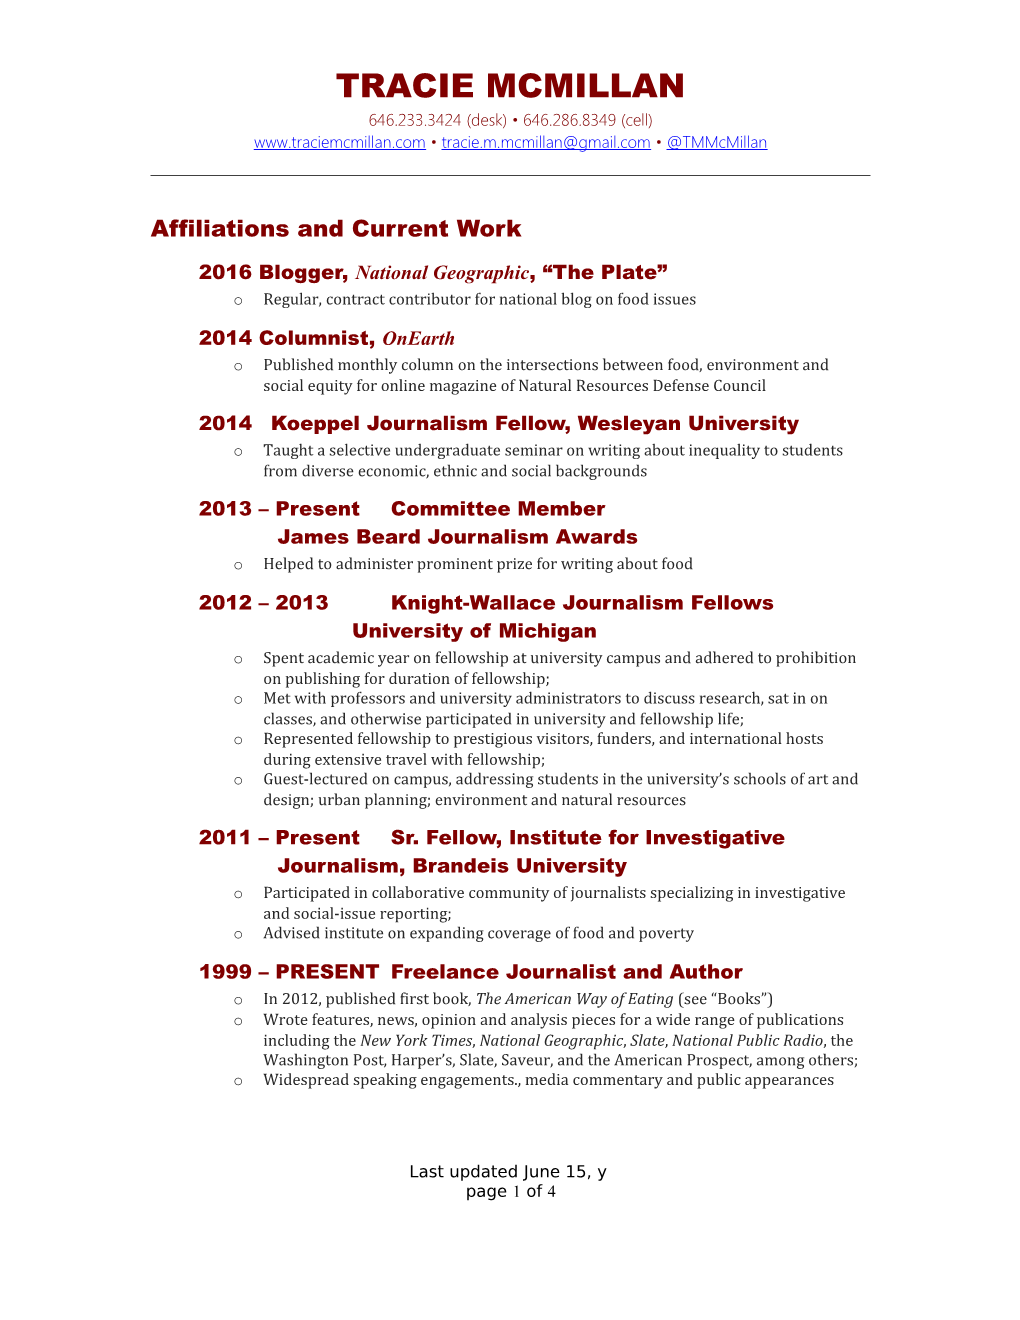 Affiliations and Current Work